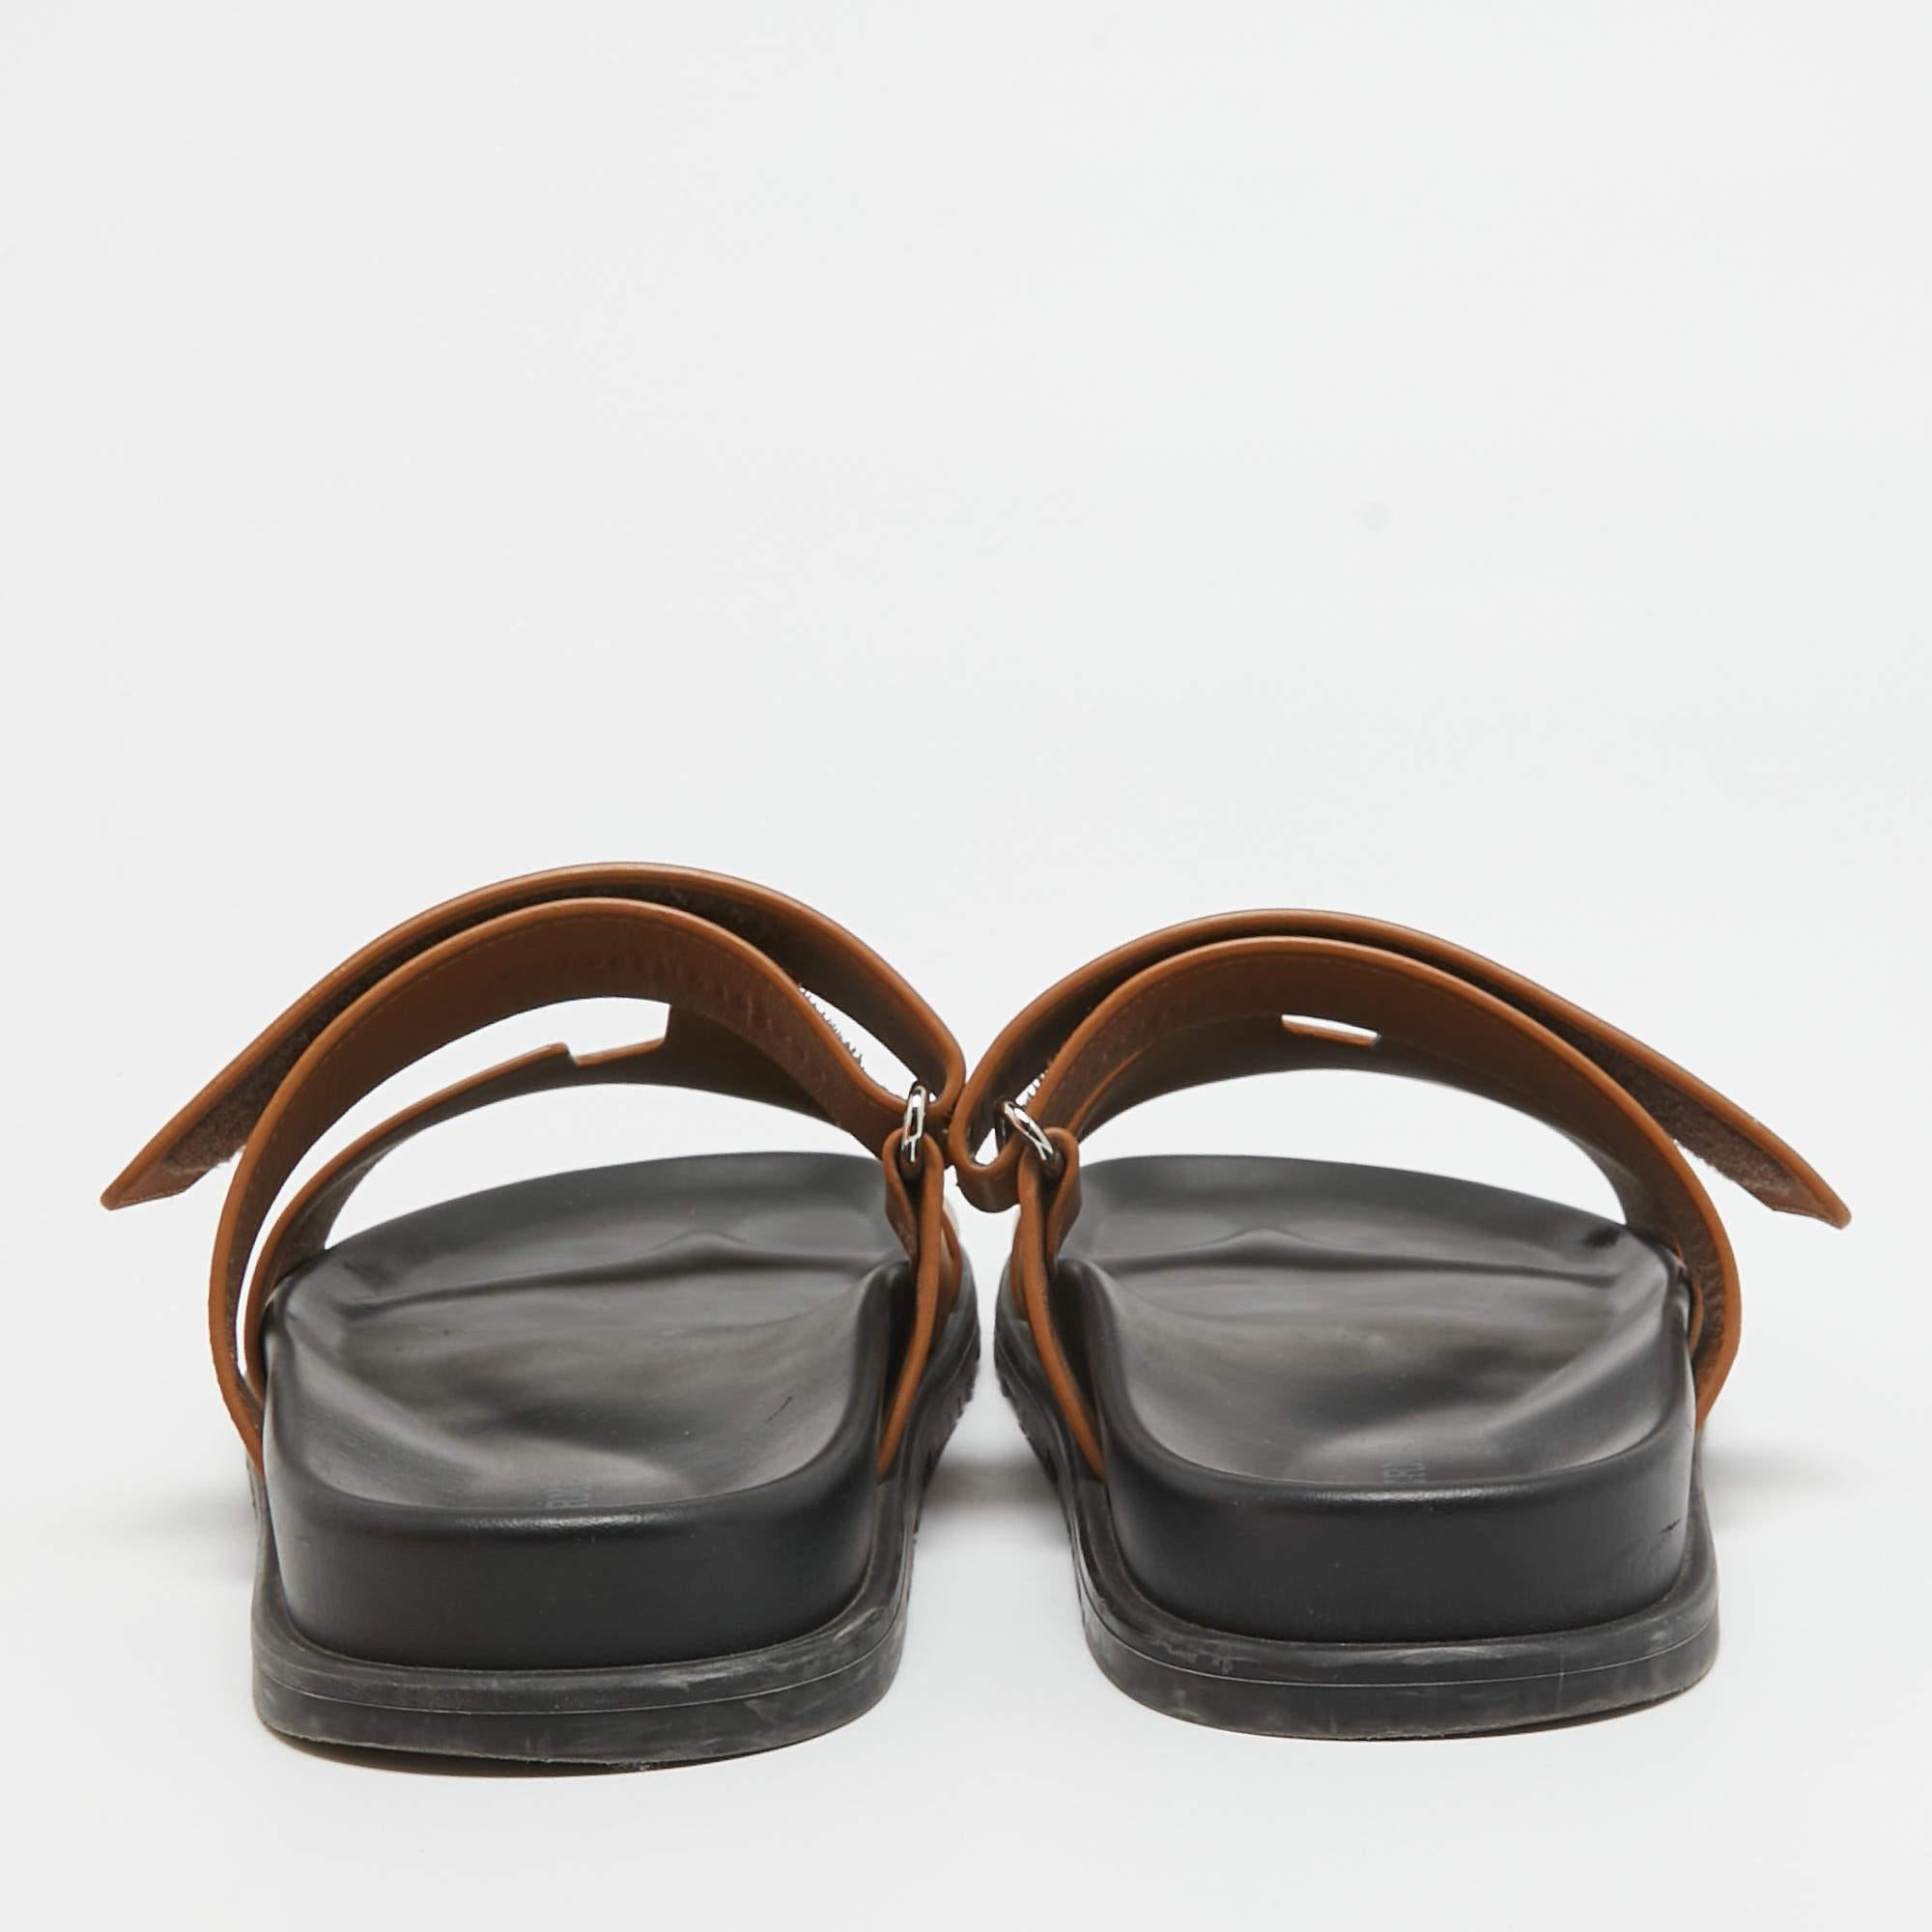 Hermes Brown Leather Chypre Sandals Size 41 In Good Condition For Sale In Dubai, Al Qouz 2